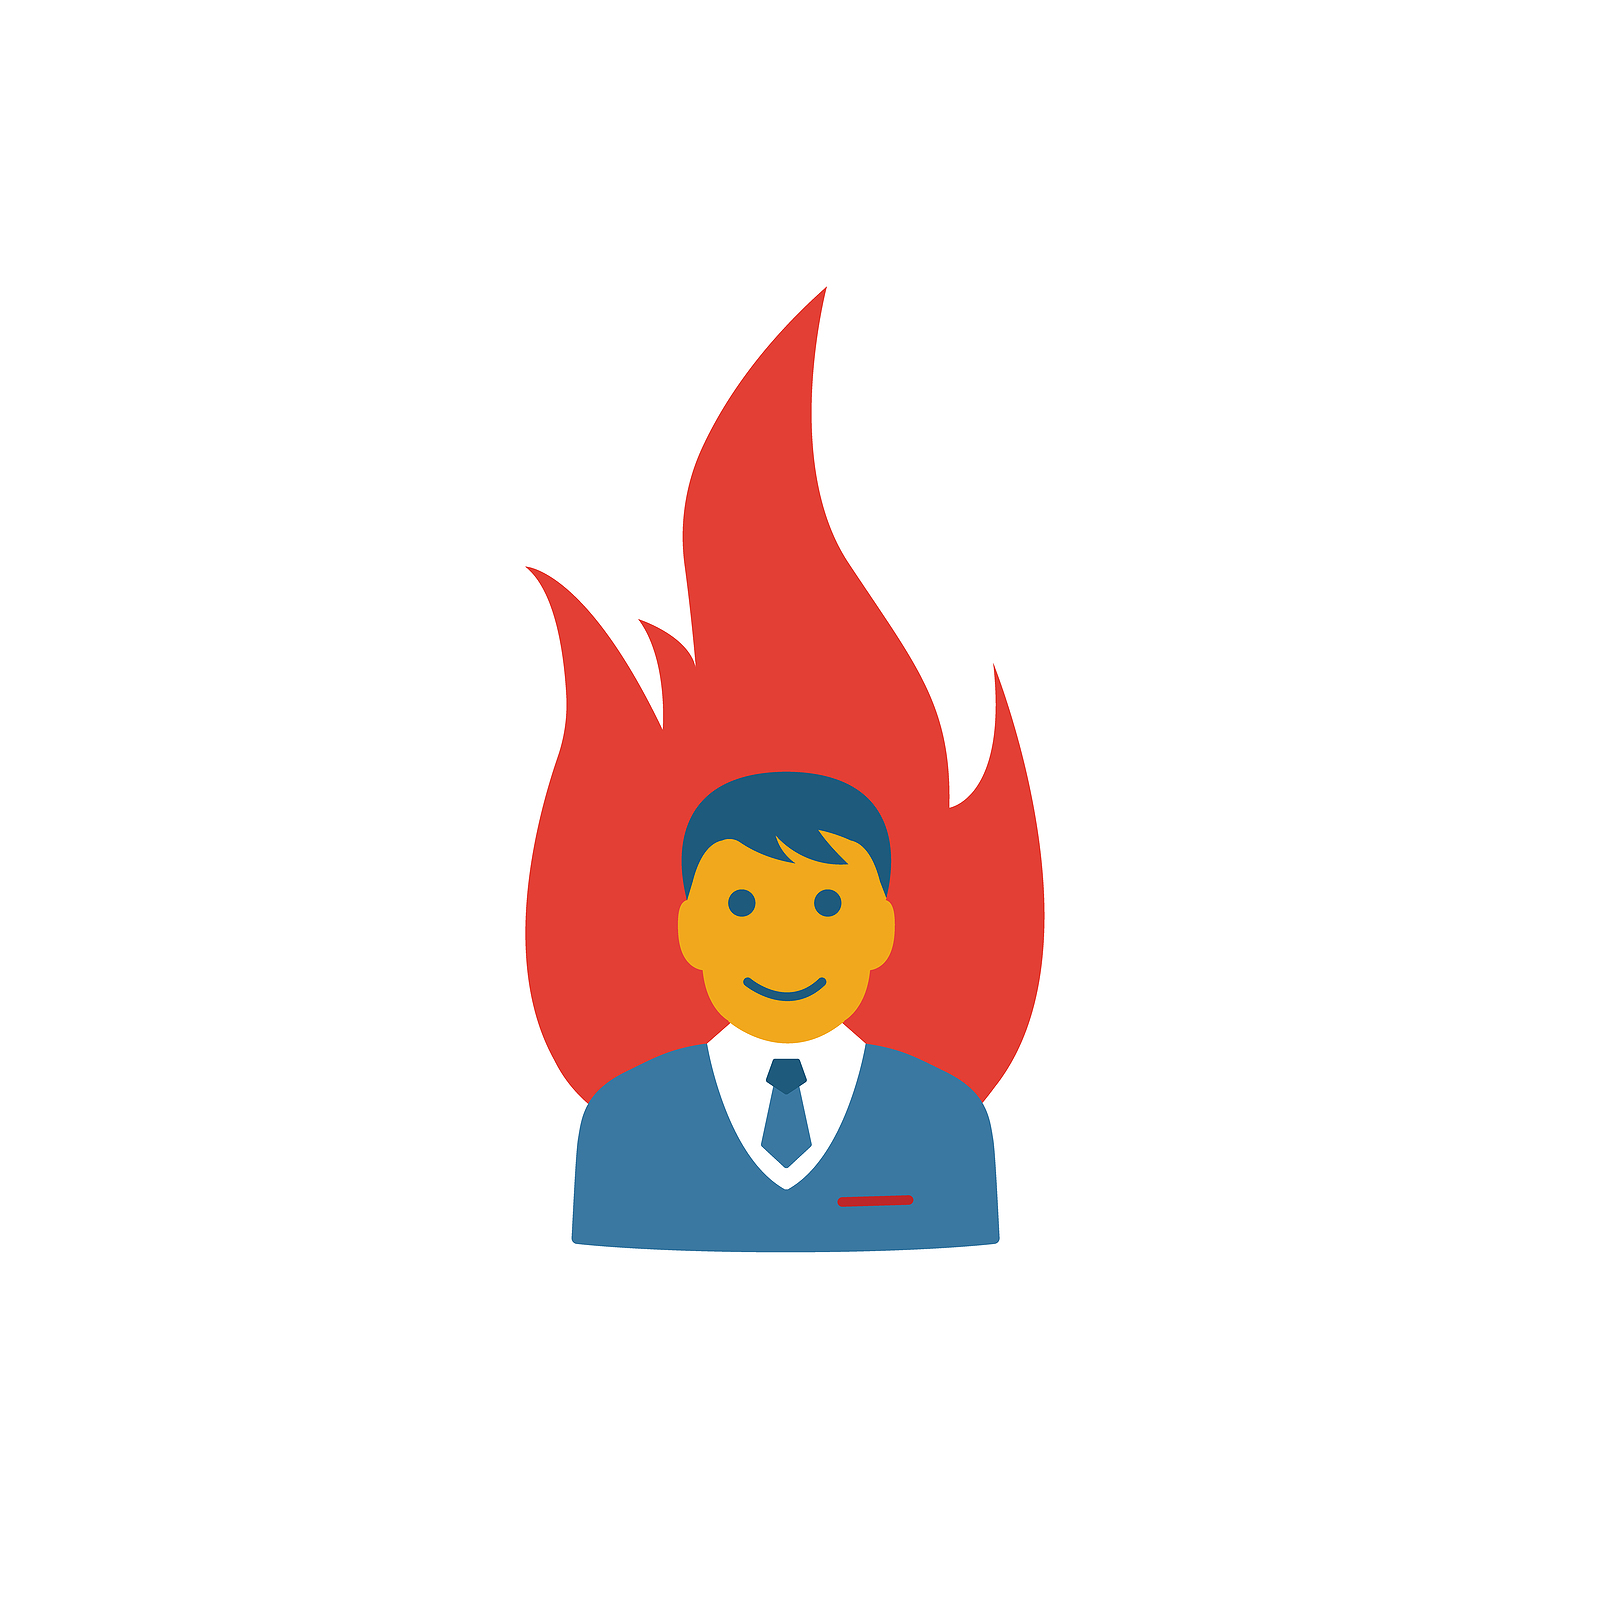 hot lead icon. Man on fire